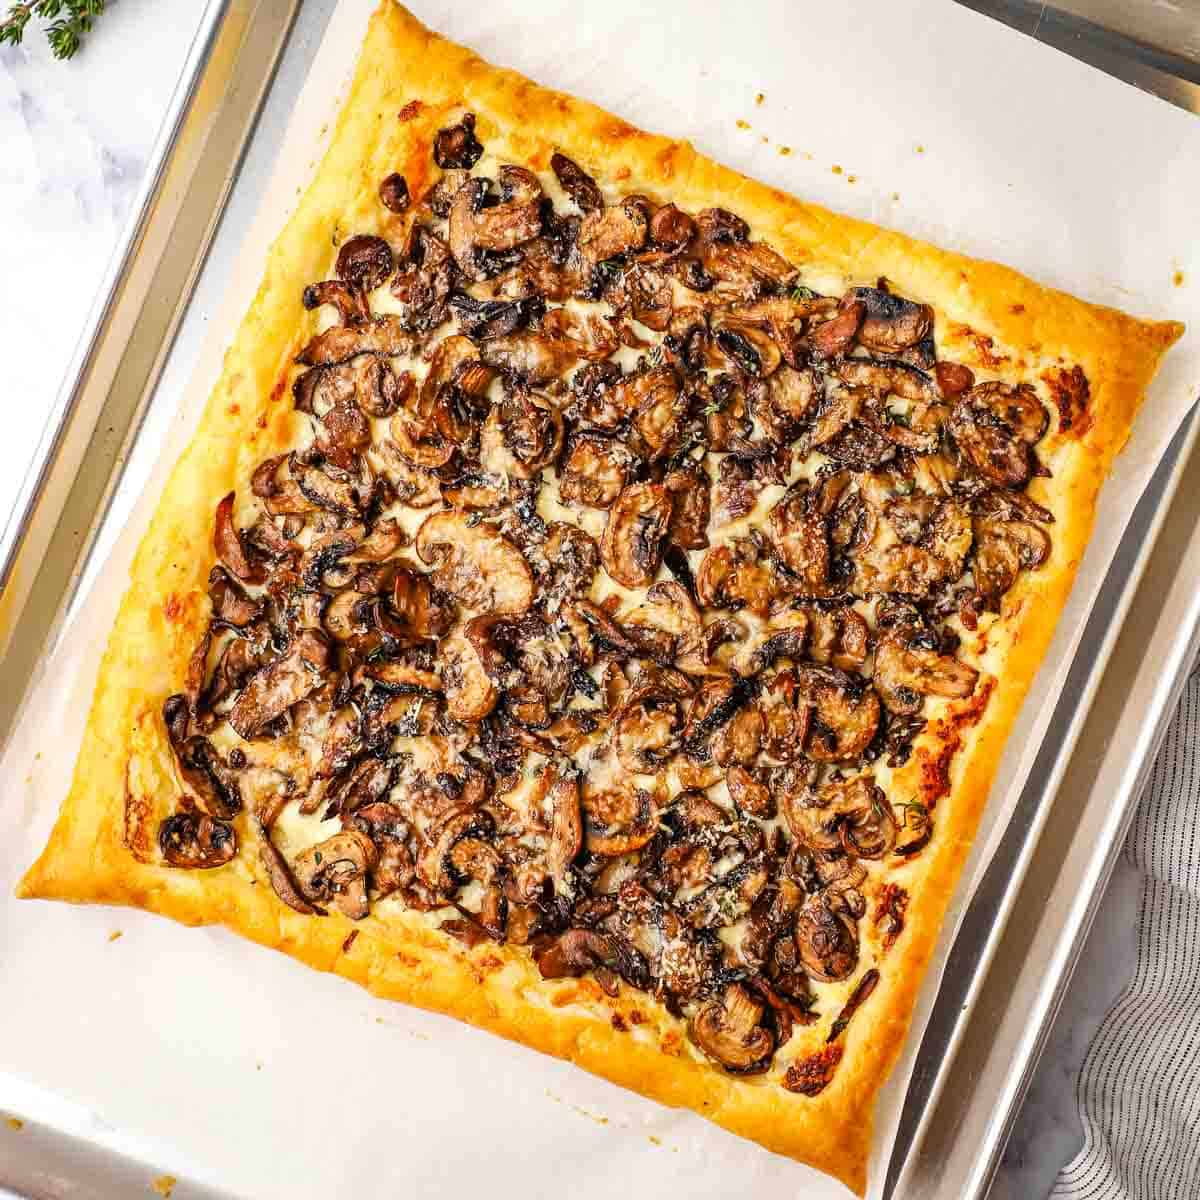 baked mushroom tart on a parchment lined baking sheet